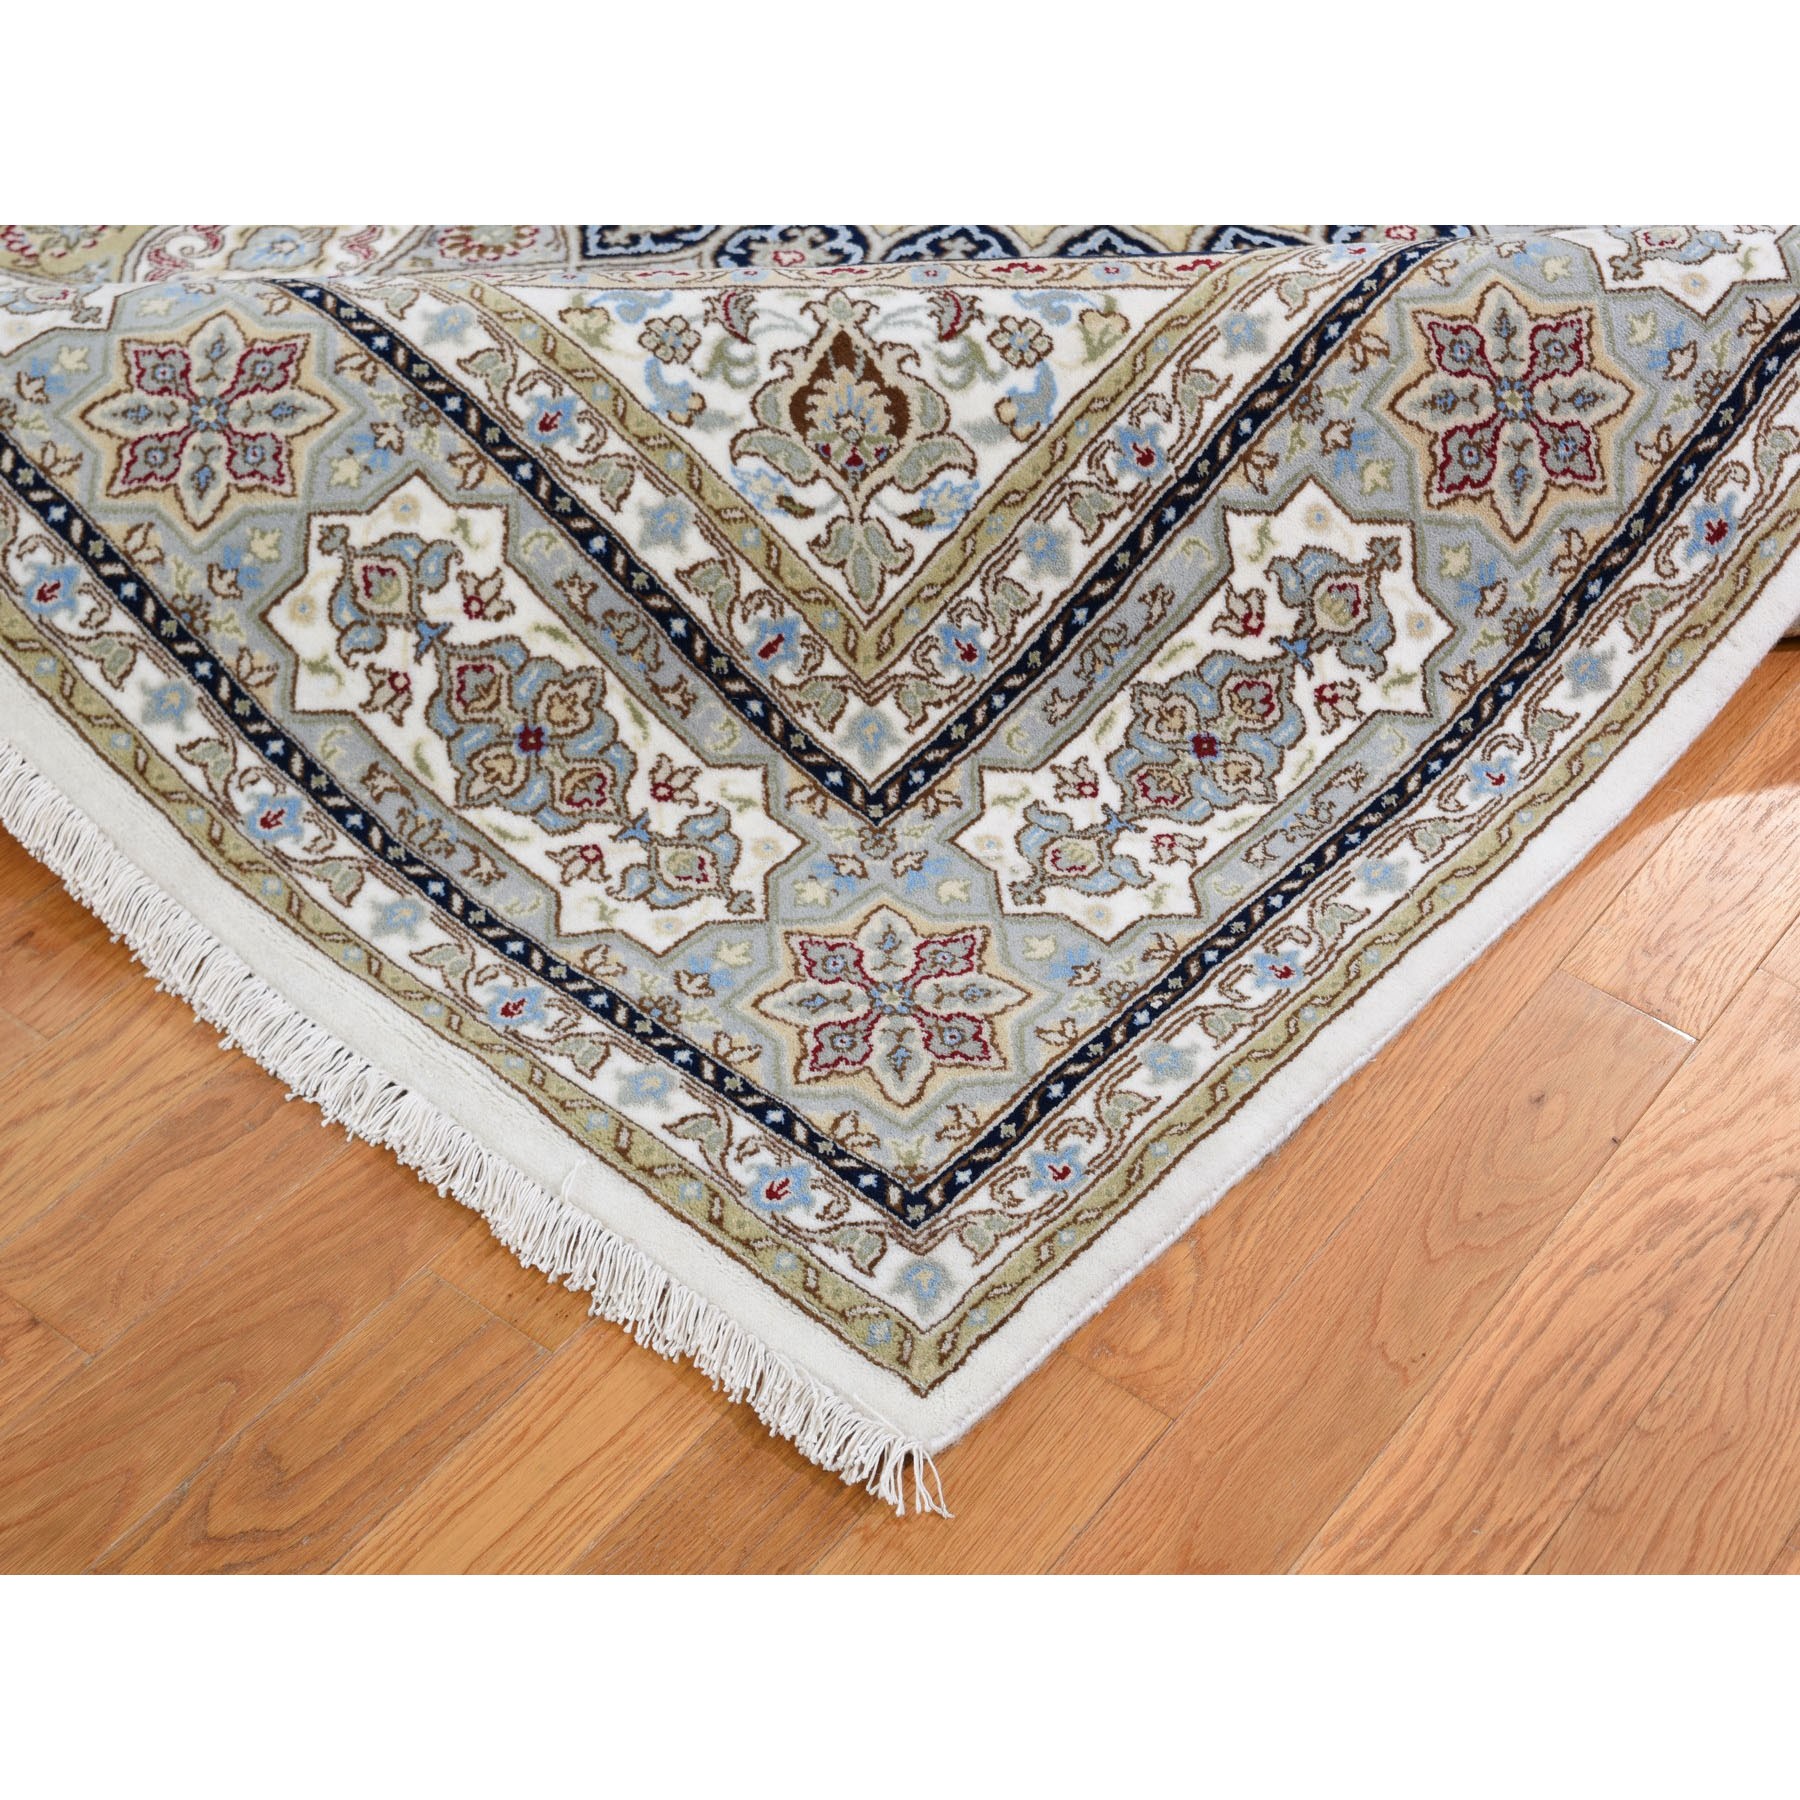 8-3 x10-2  Gray Nain With Gumbad Design Wool and Silk Hand Knotted Oriental Rug 